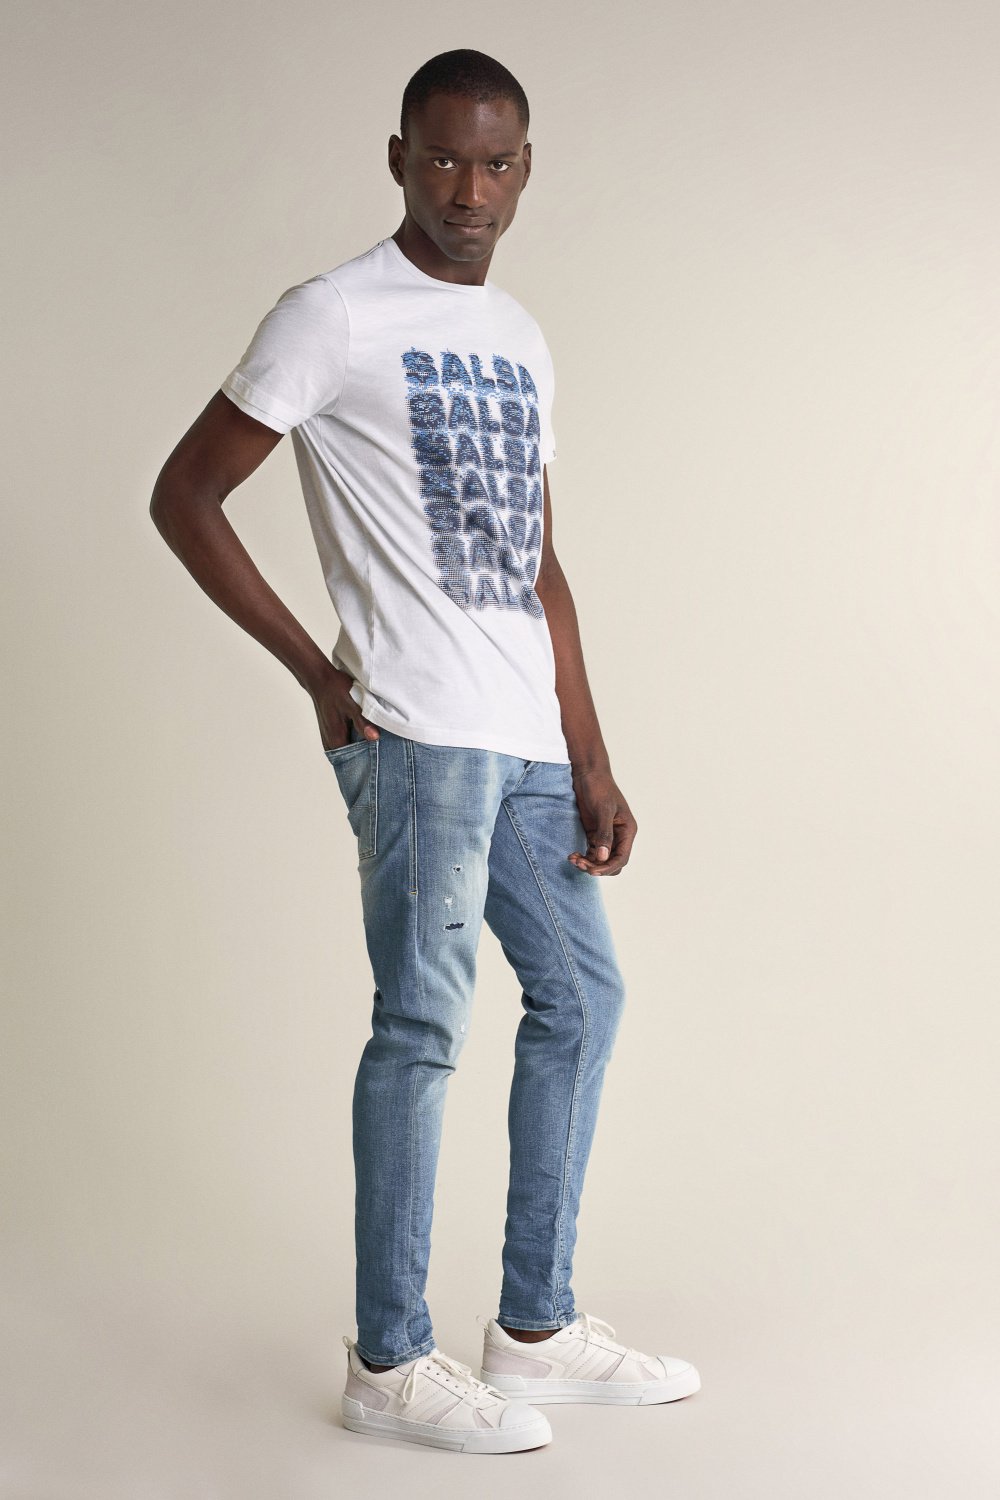 Clash skinny ready to go ripped jeans - Salsa